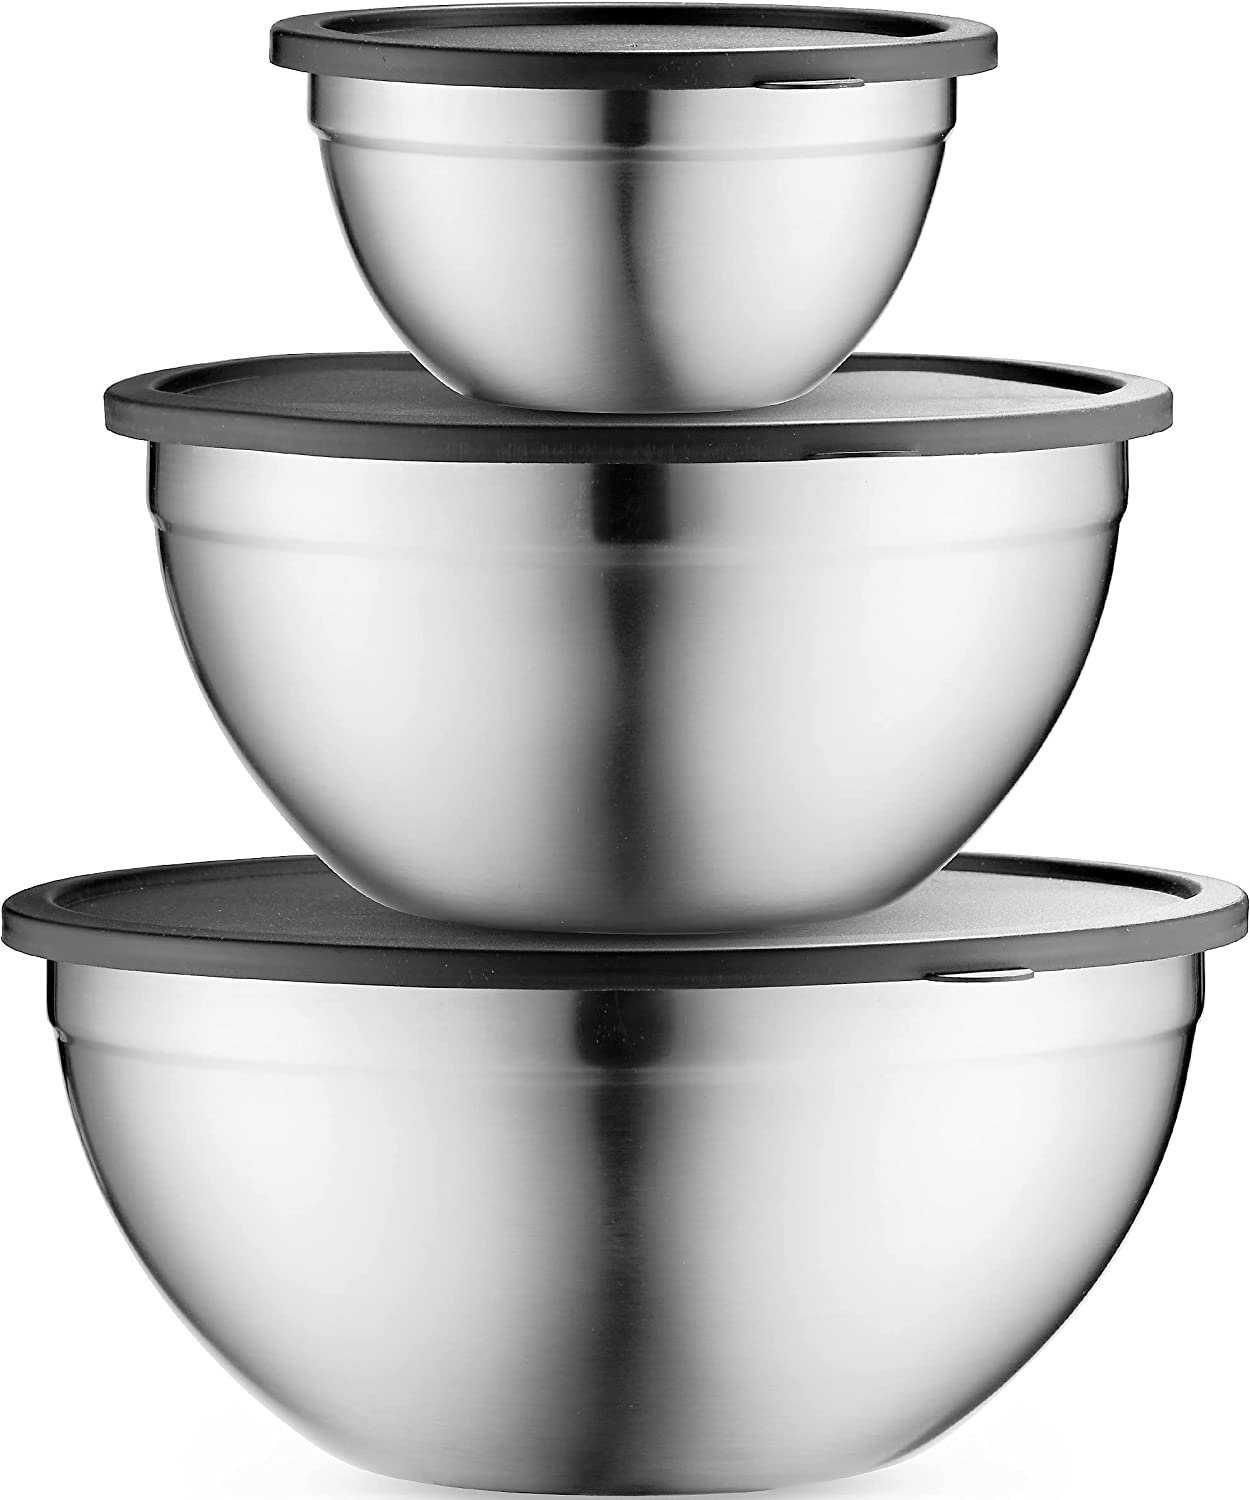 Glass Mixing Bowls with Lids Set of 3 - Large Kitchen Salad Space-Saving  Nesting Bowls, Round Serving Bowls for Cooking,Baking,Prepping,Dishwasher  Safe